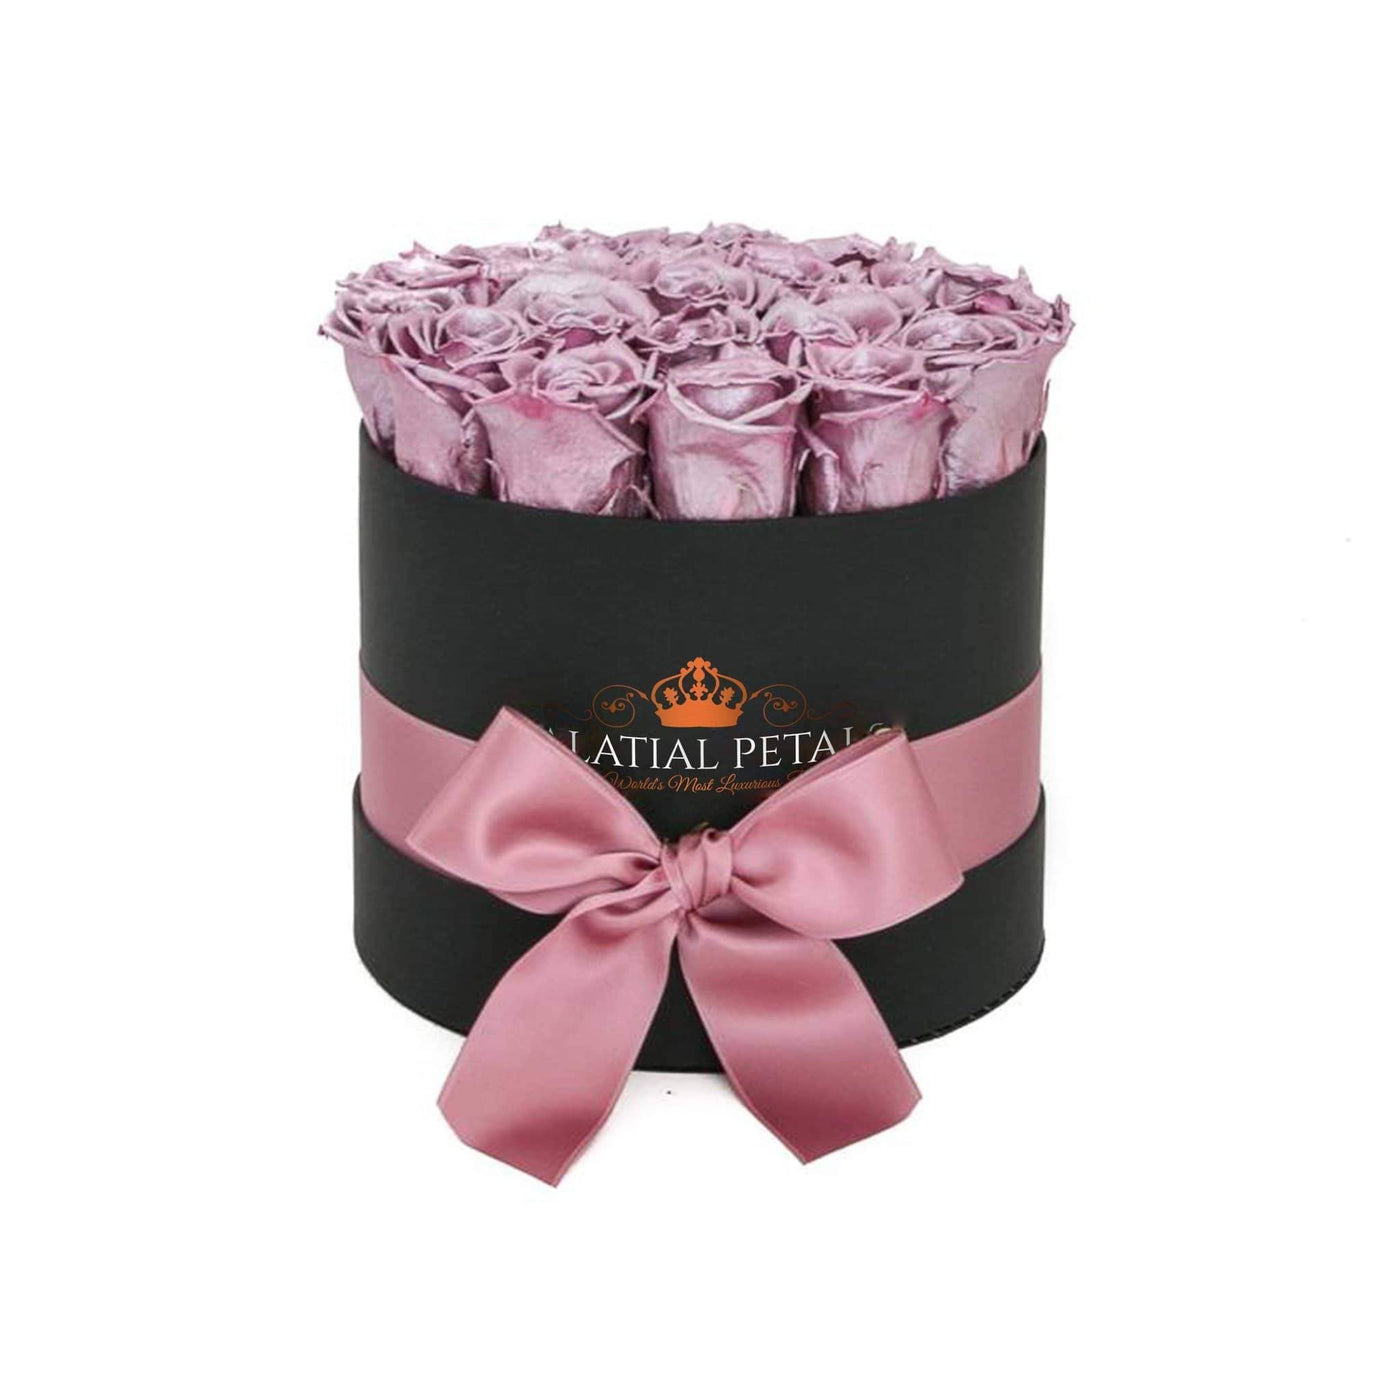 Metallic Pink Roses That Last A Year - Classic Rose Box